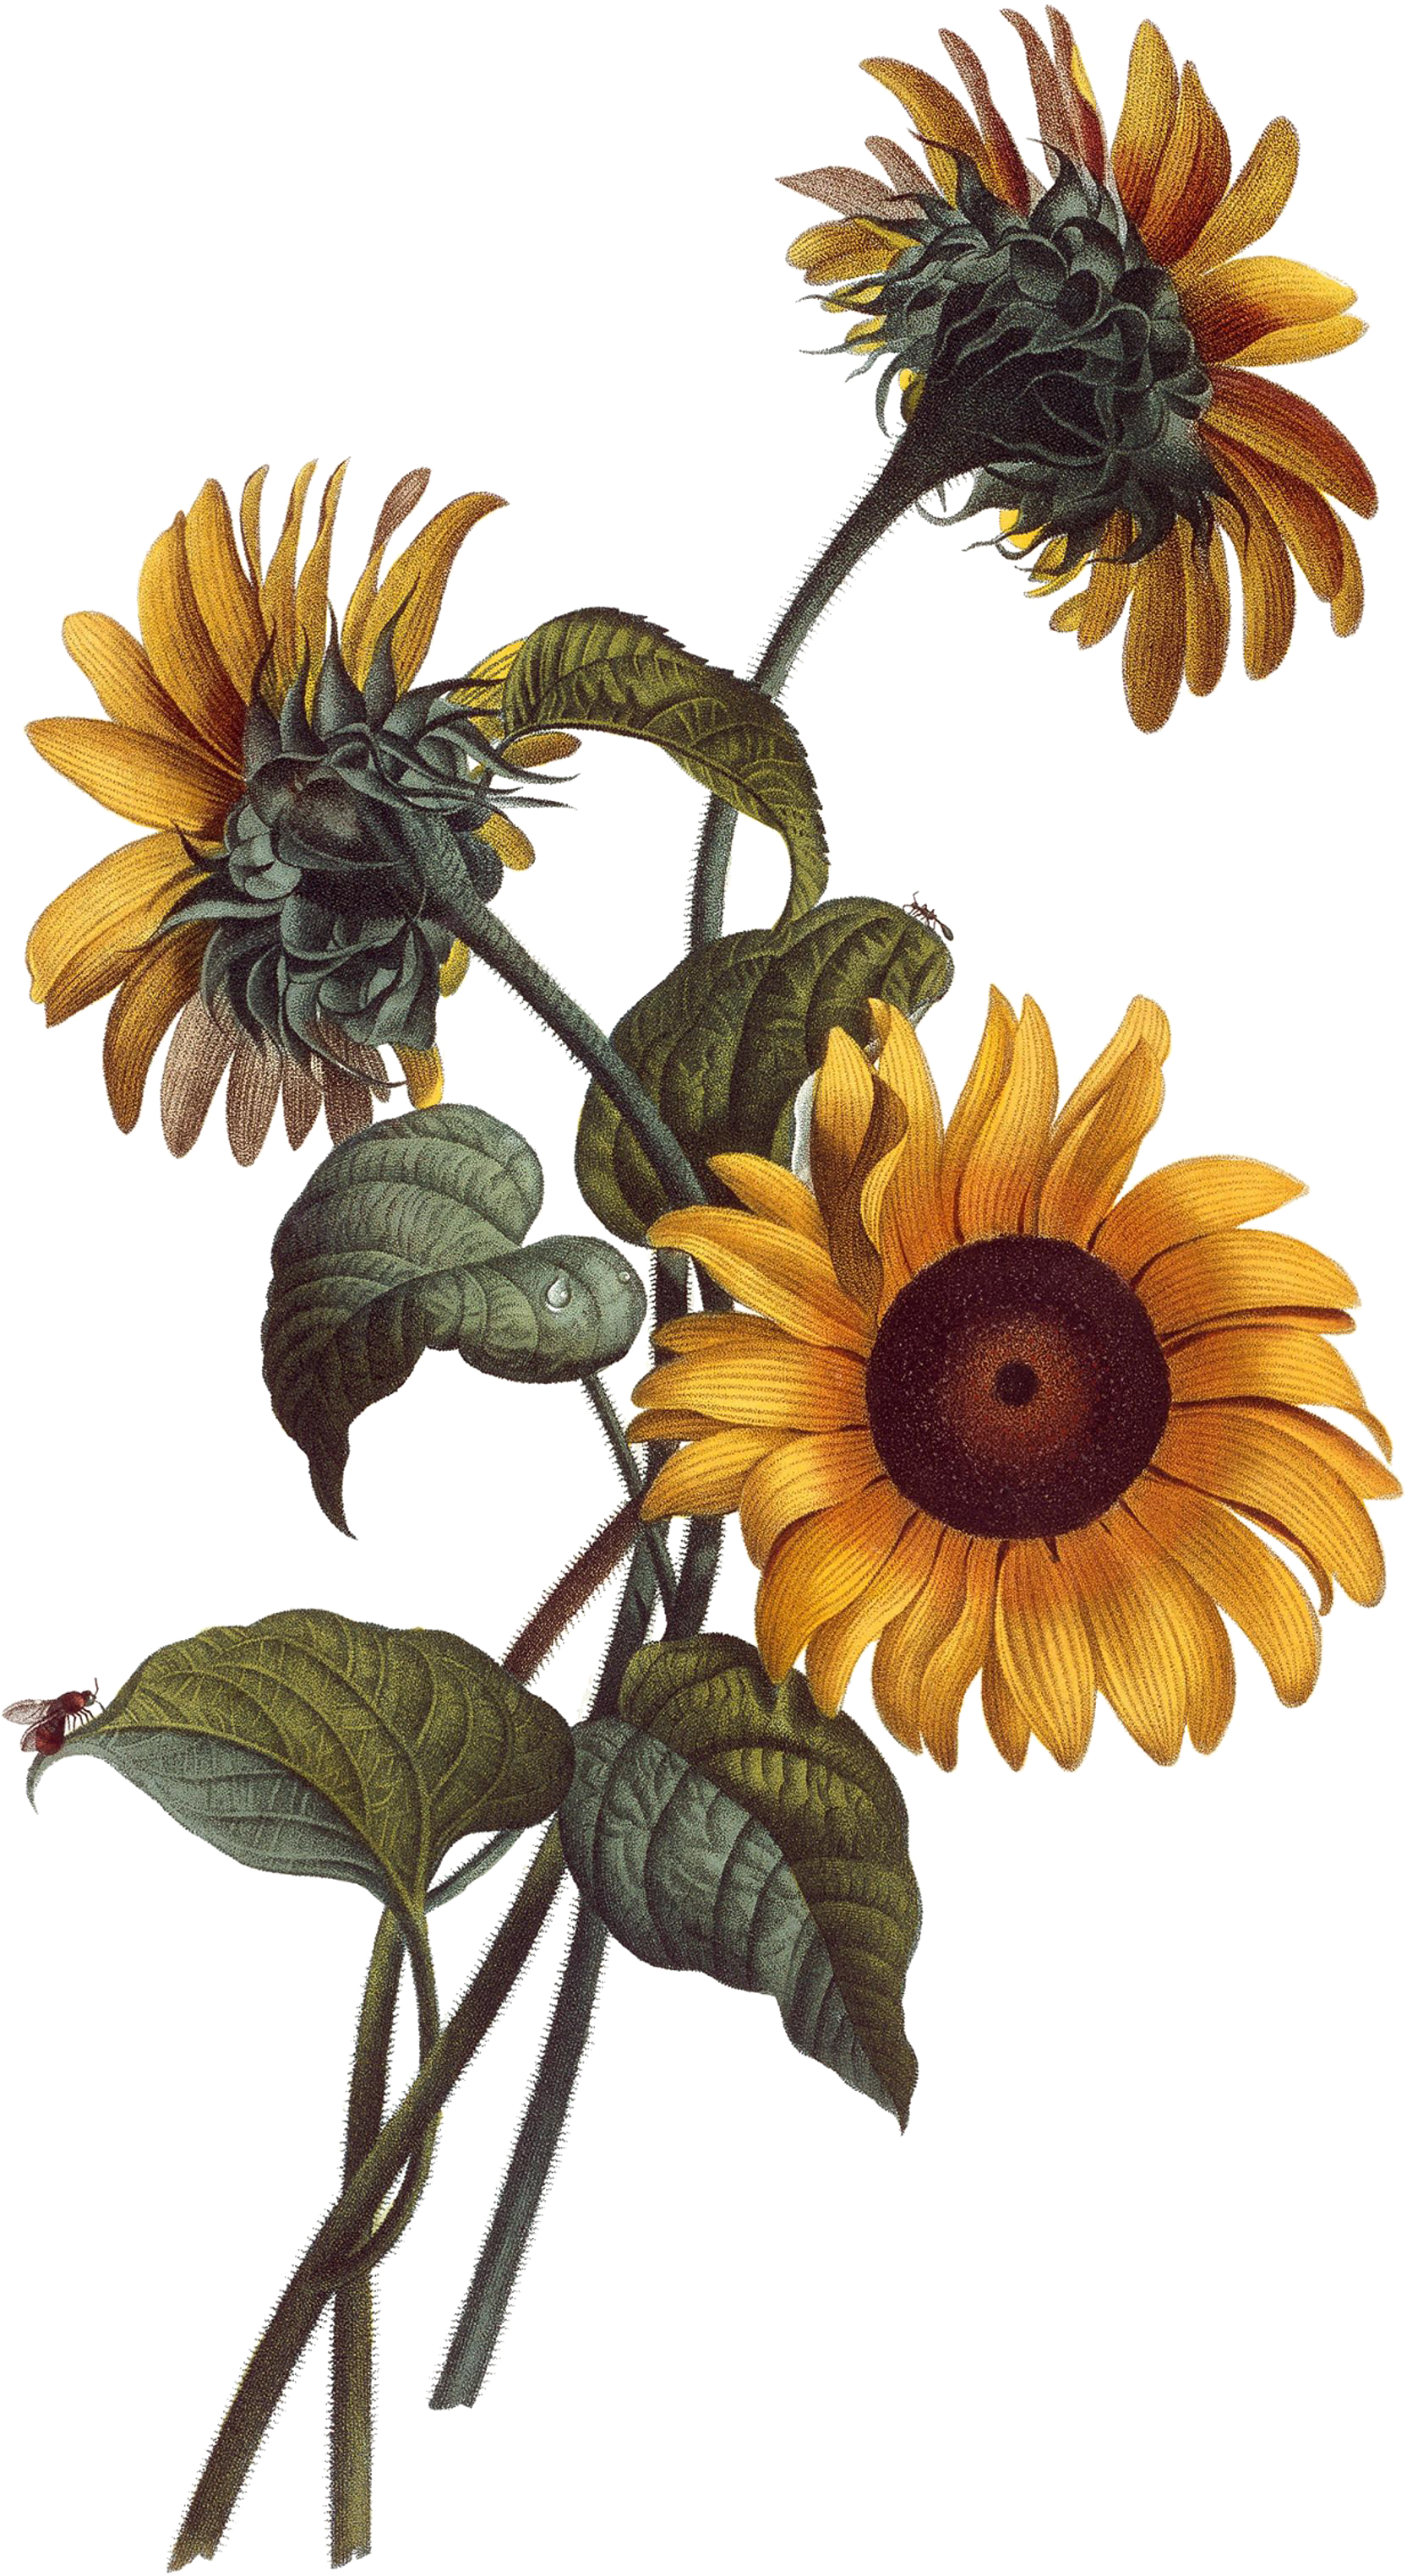 Common Sunflower Watercolor Painting Drawing Botanical - Sunflower Illustration (2134x3200)